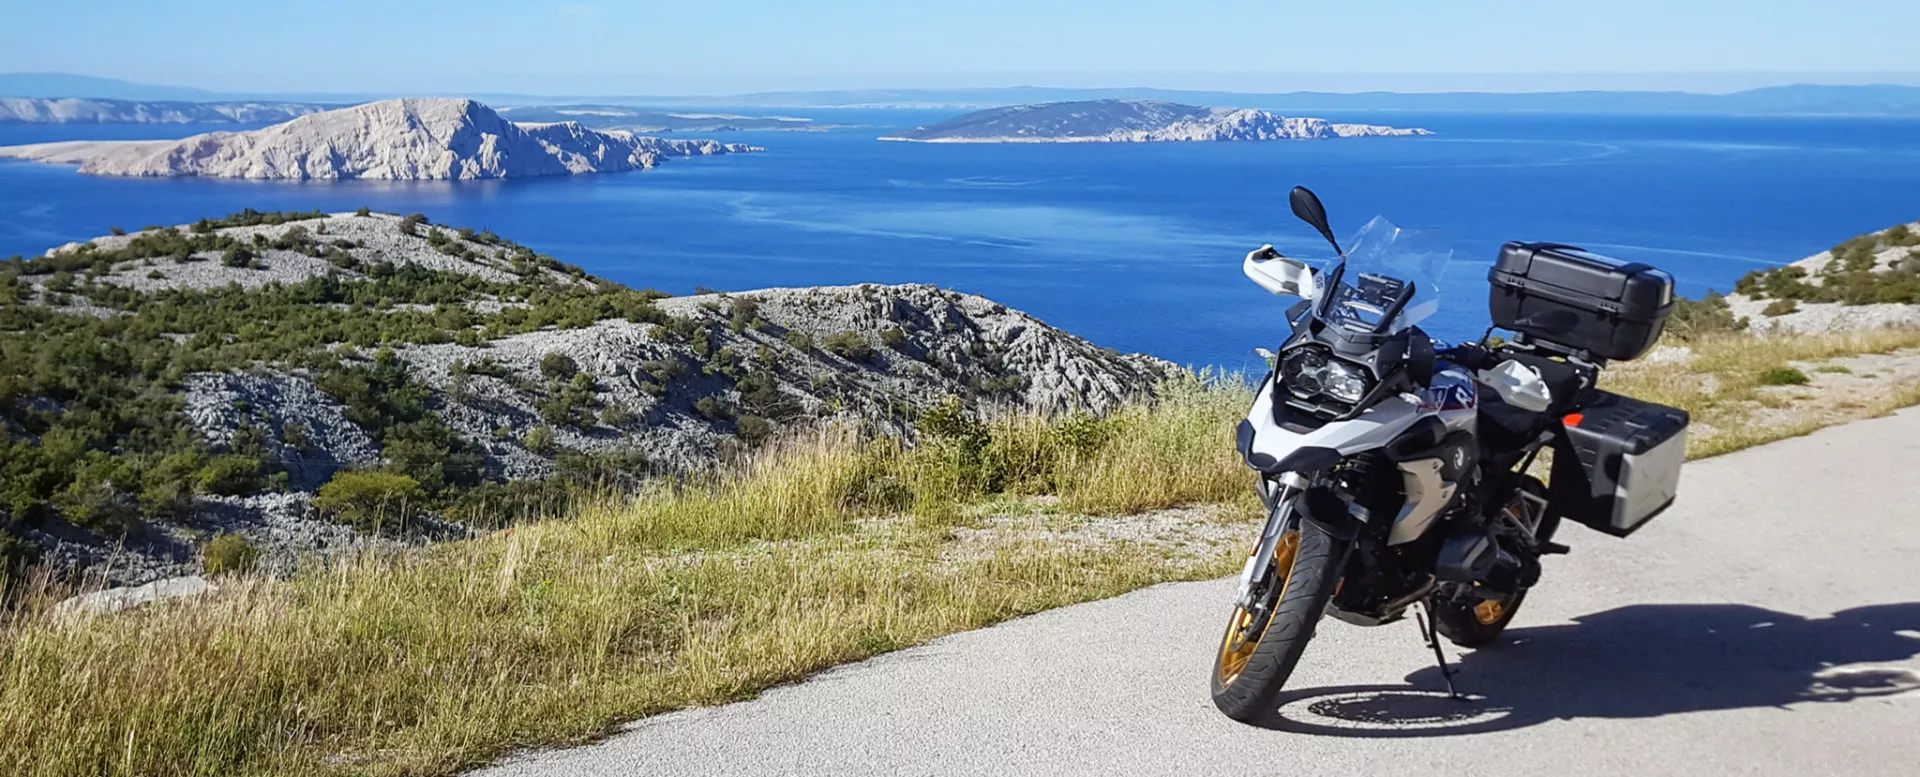 Adriatic Moto Tours in Slovenia, Europe | Motorcycles - Rated 0.9